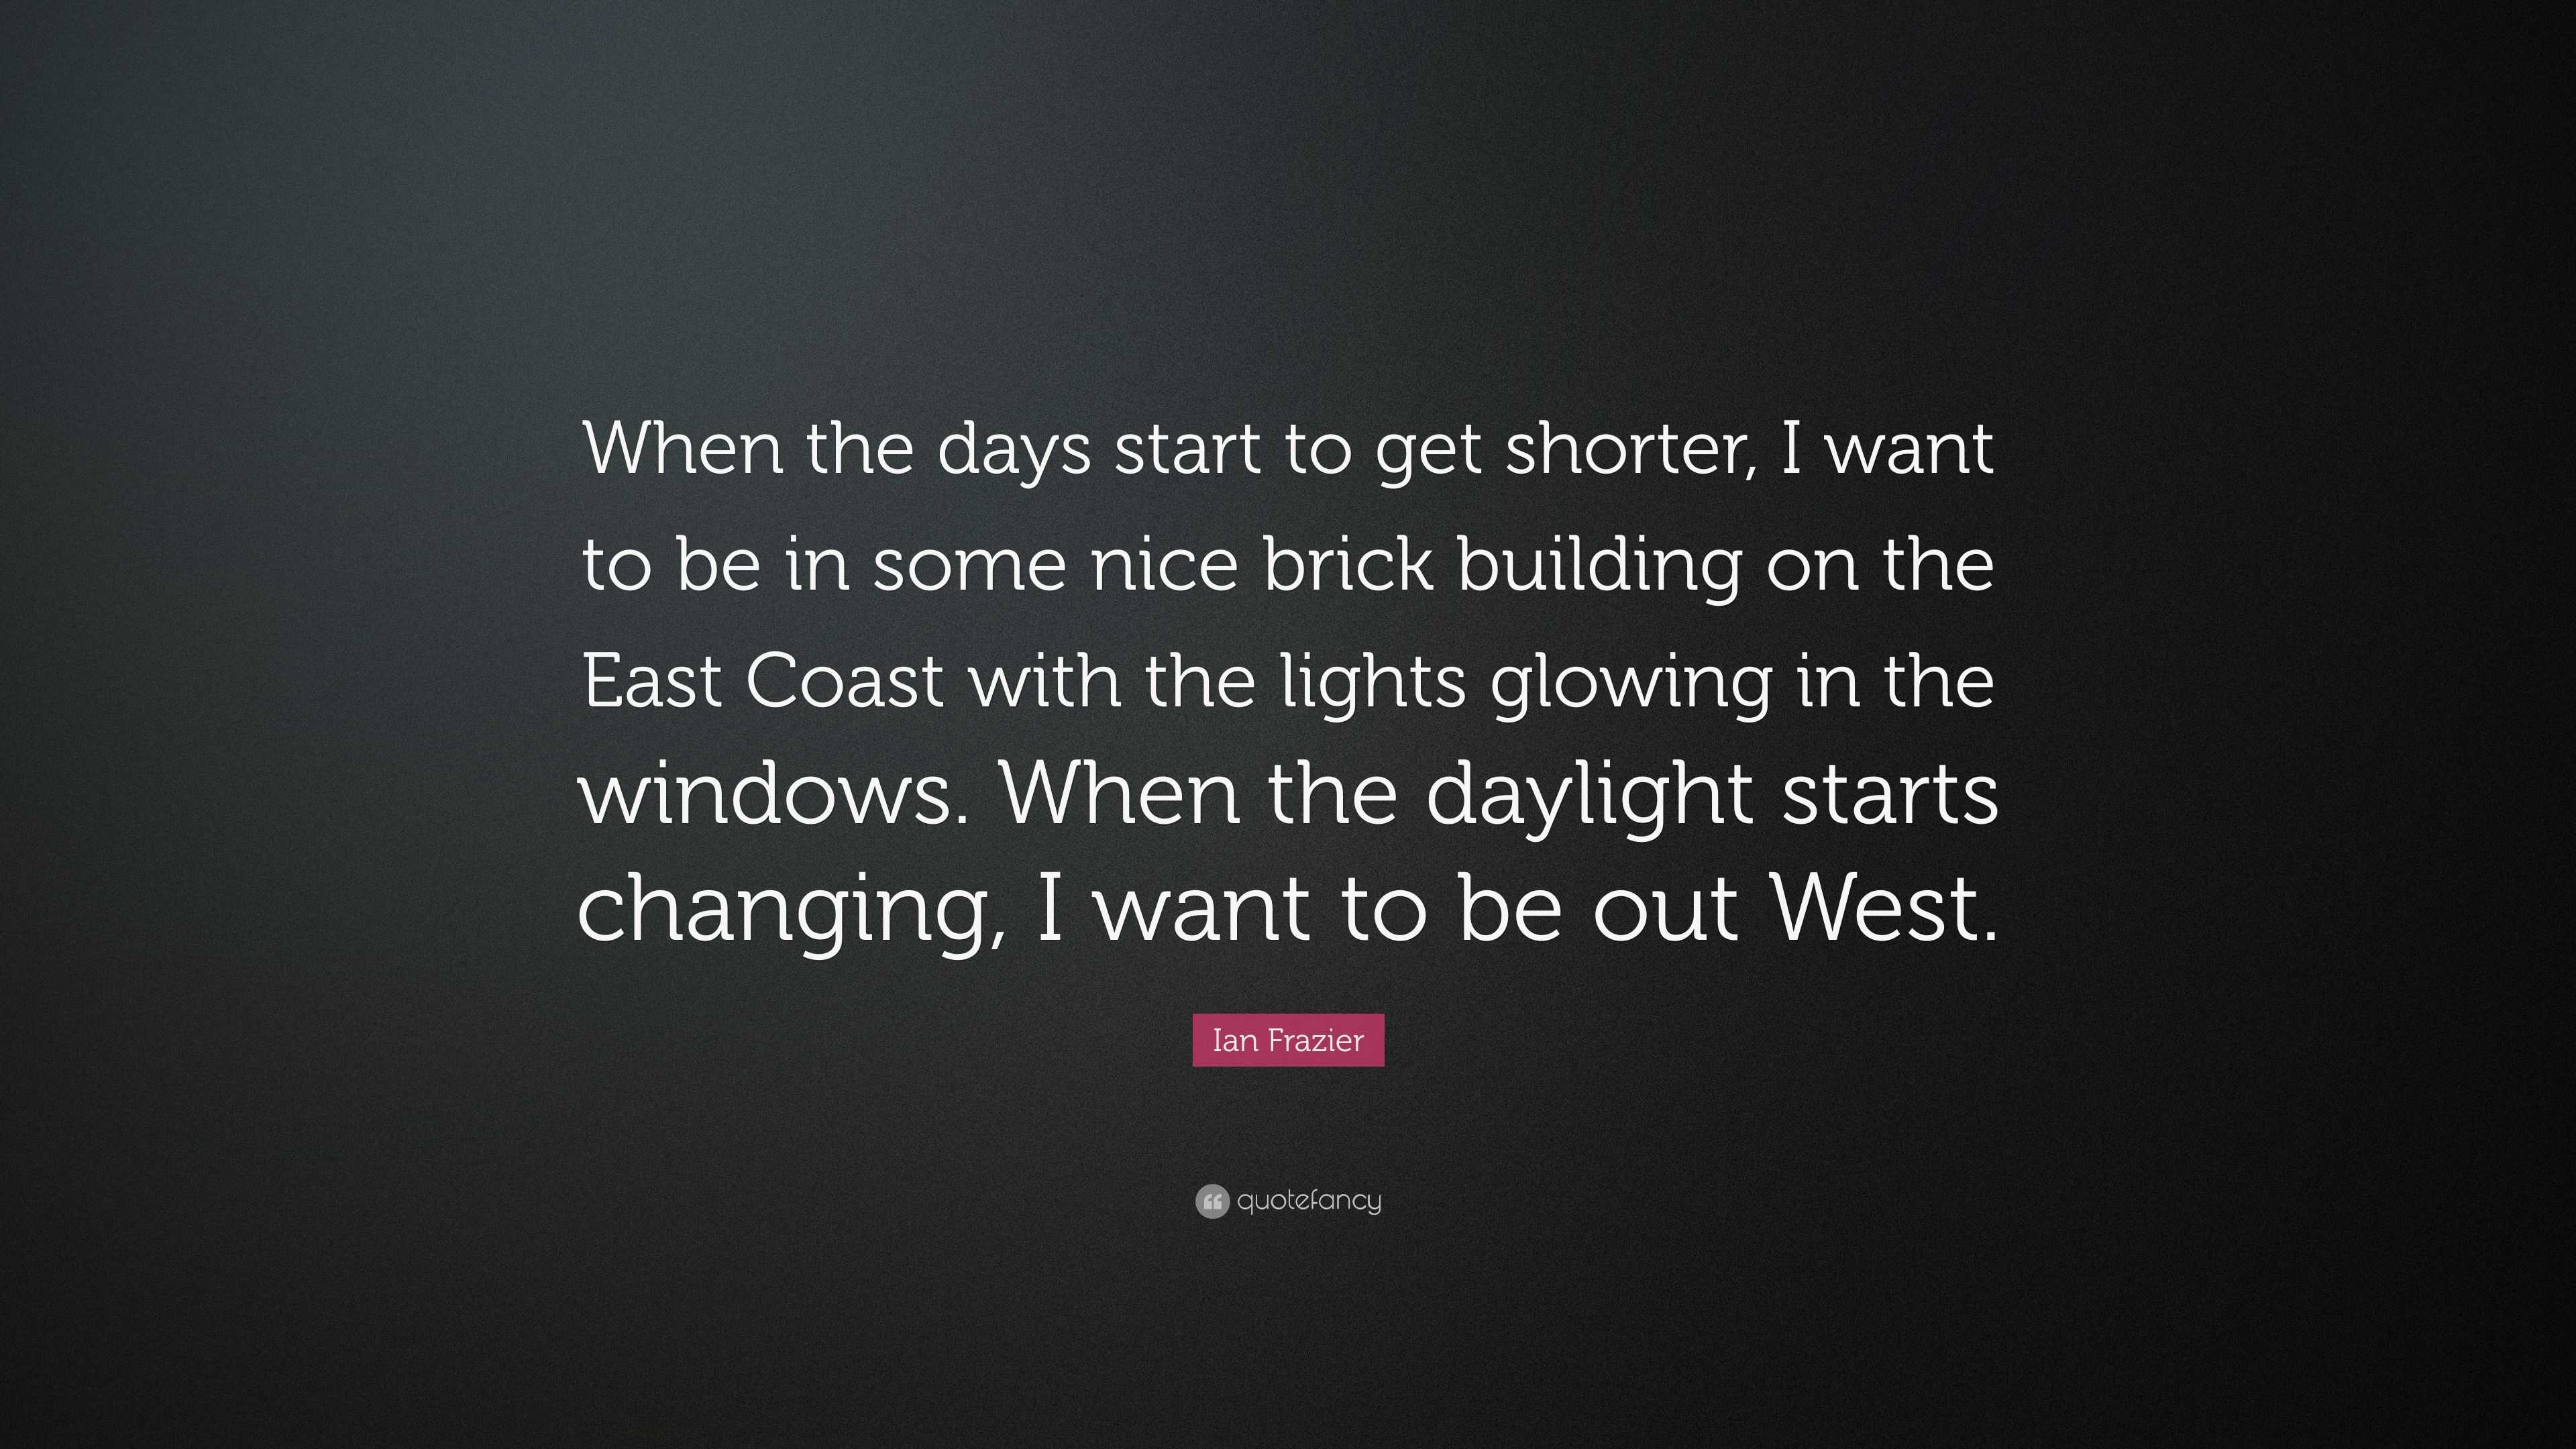 Ian Frazier Quote When The Days Start To Get Shorter I Want To Be In Some Nice Brick Building On The East Coast With The Lights Glowing I 7 Wallpapers Quotefancy